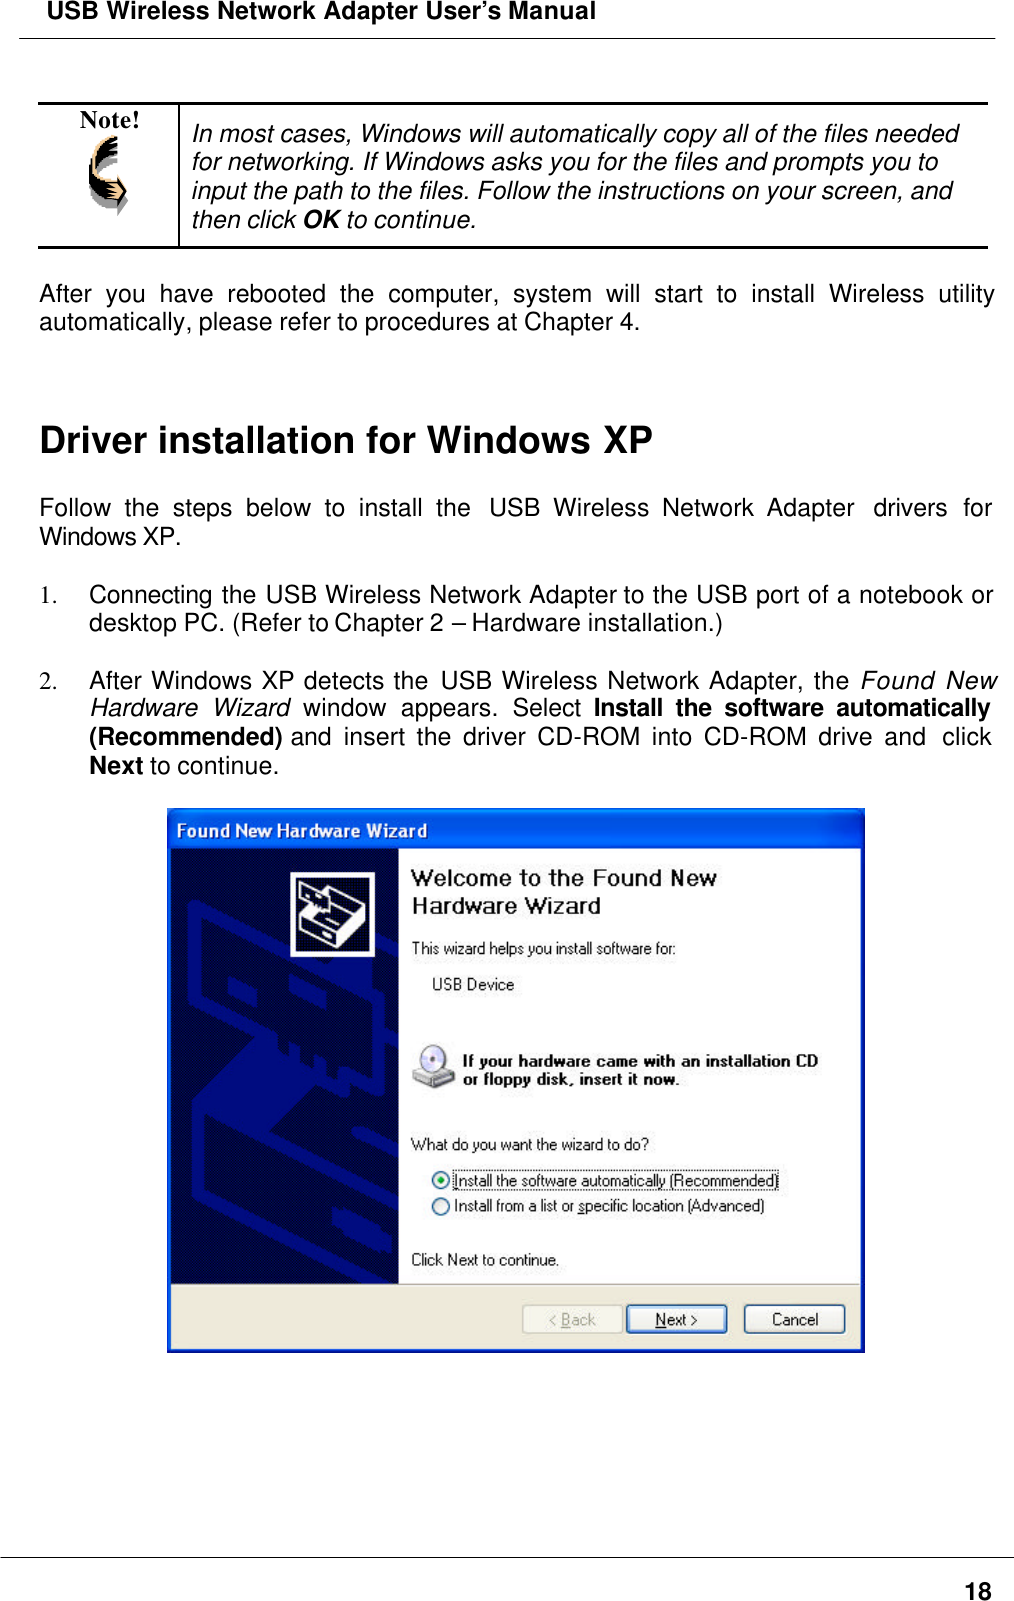  USB Wireless Network Adapter User’s Manual18Note! In most cases, Windows will automatically copy all of the files neededfor networking. If Windows asks you for the files and prompts you toinput the path to the files. Follow the instructions on your screen, andthen click OK to continue.After you have rebooted the computer, system will start to install Wireless utilityautomatically, please refer to procedures at Chapter 4.Driver installation for Windows XPFollow the steps below to install the  USB Wireless Network Adapter  drivers forWindows XP.1. Connecting the USB Wireless Network Adapter to the USB port of a notebook ordesktop PC. (Refer to Chapter 2 – Hardware installation.)2. After Windows XP detects the USB Wireless Network Adapter, the Found NewHardware Wizard window appears. Select  Install the software automatically(Recommended) and insert the driver CD-ROM into CD-ROM drive and  clickNext to continue.